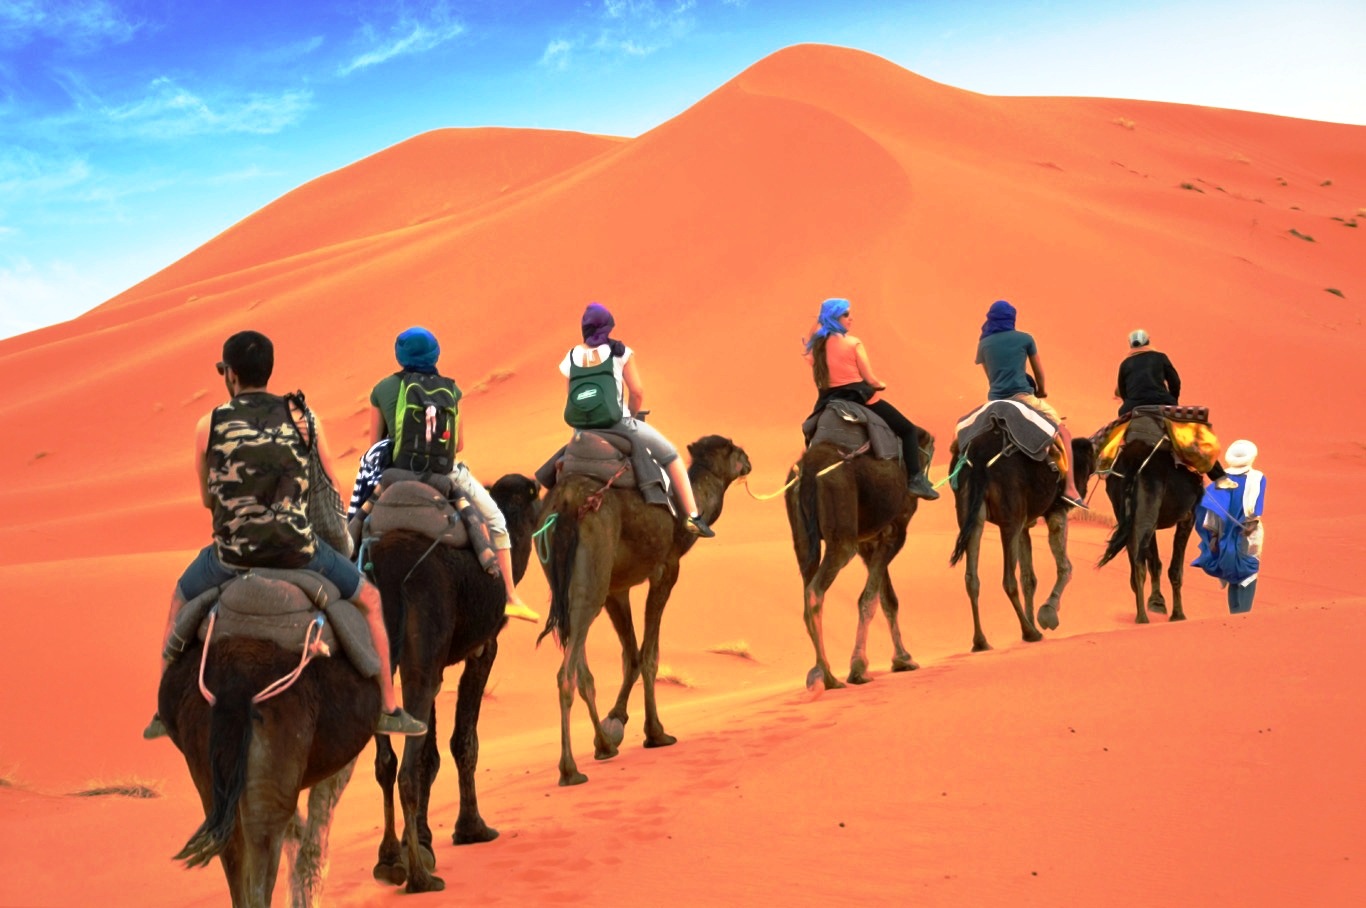 12 days Morocco New Year tour from Tangier to visit Morocco covering Chefchaouen, imperial cities and Sahara desert of Merzouga